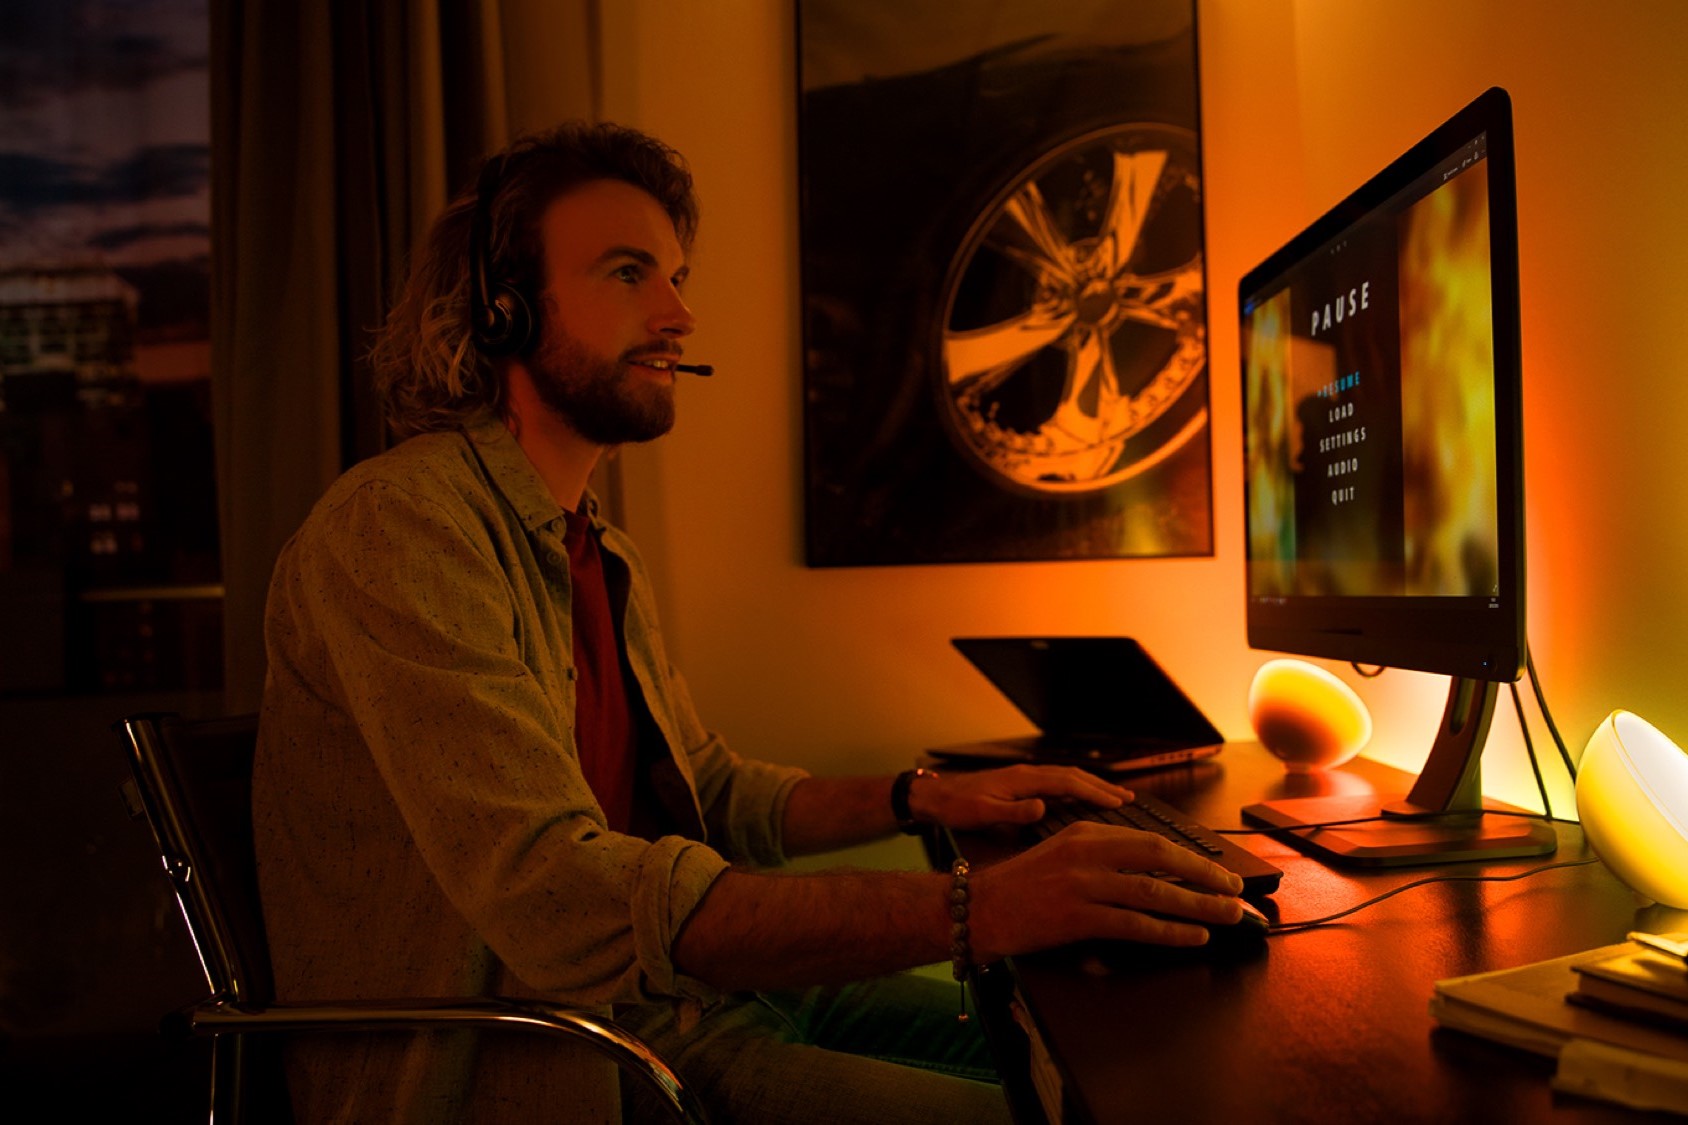 How To Control Philips Hue On PC